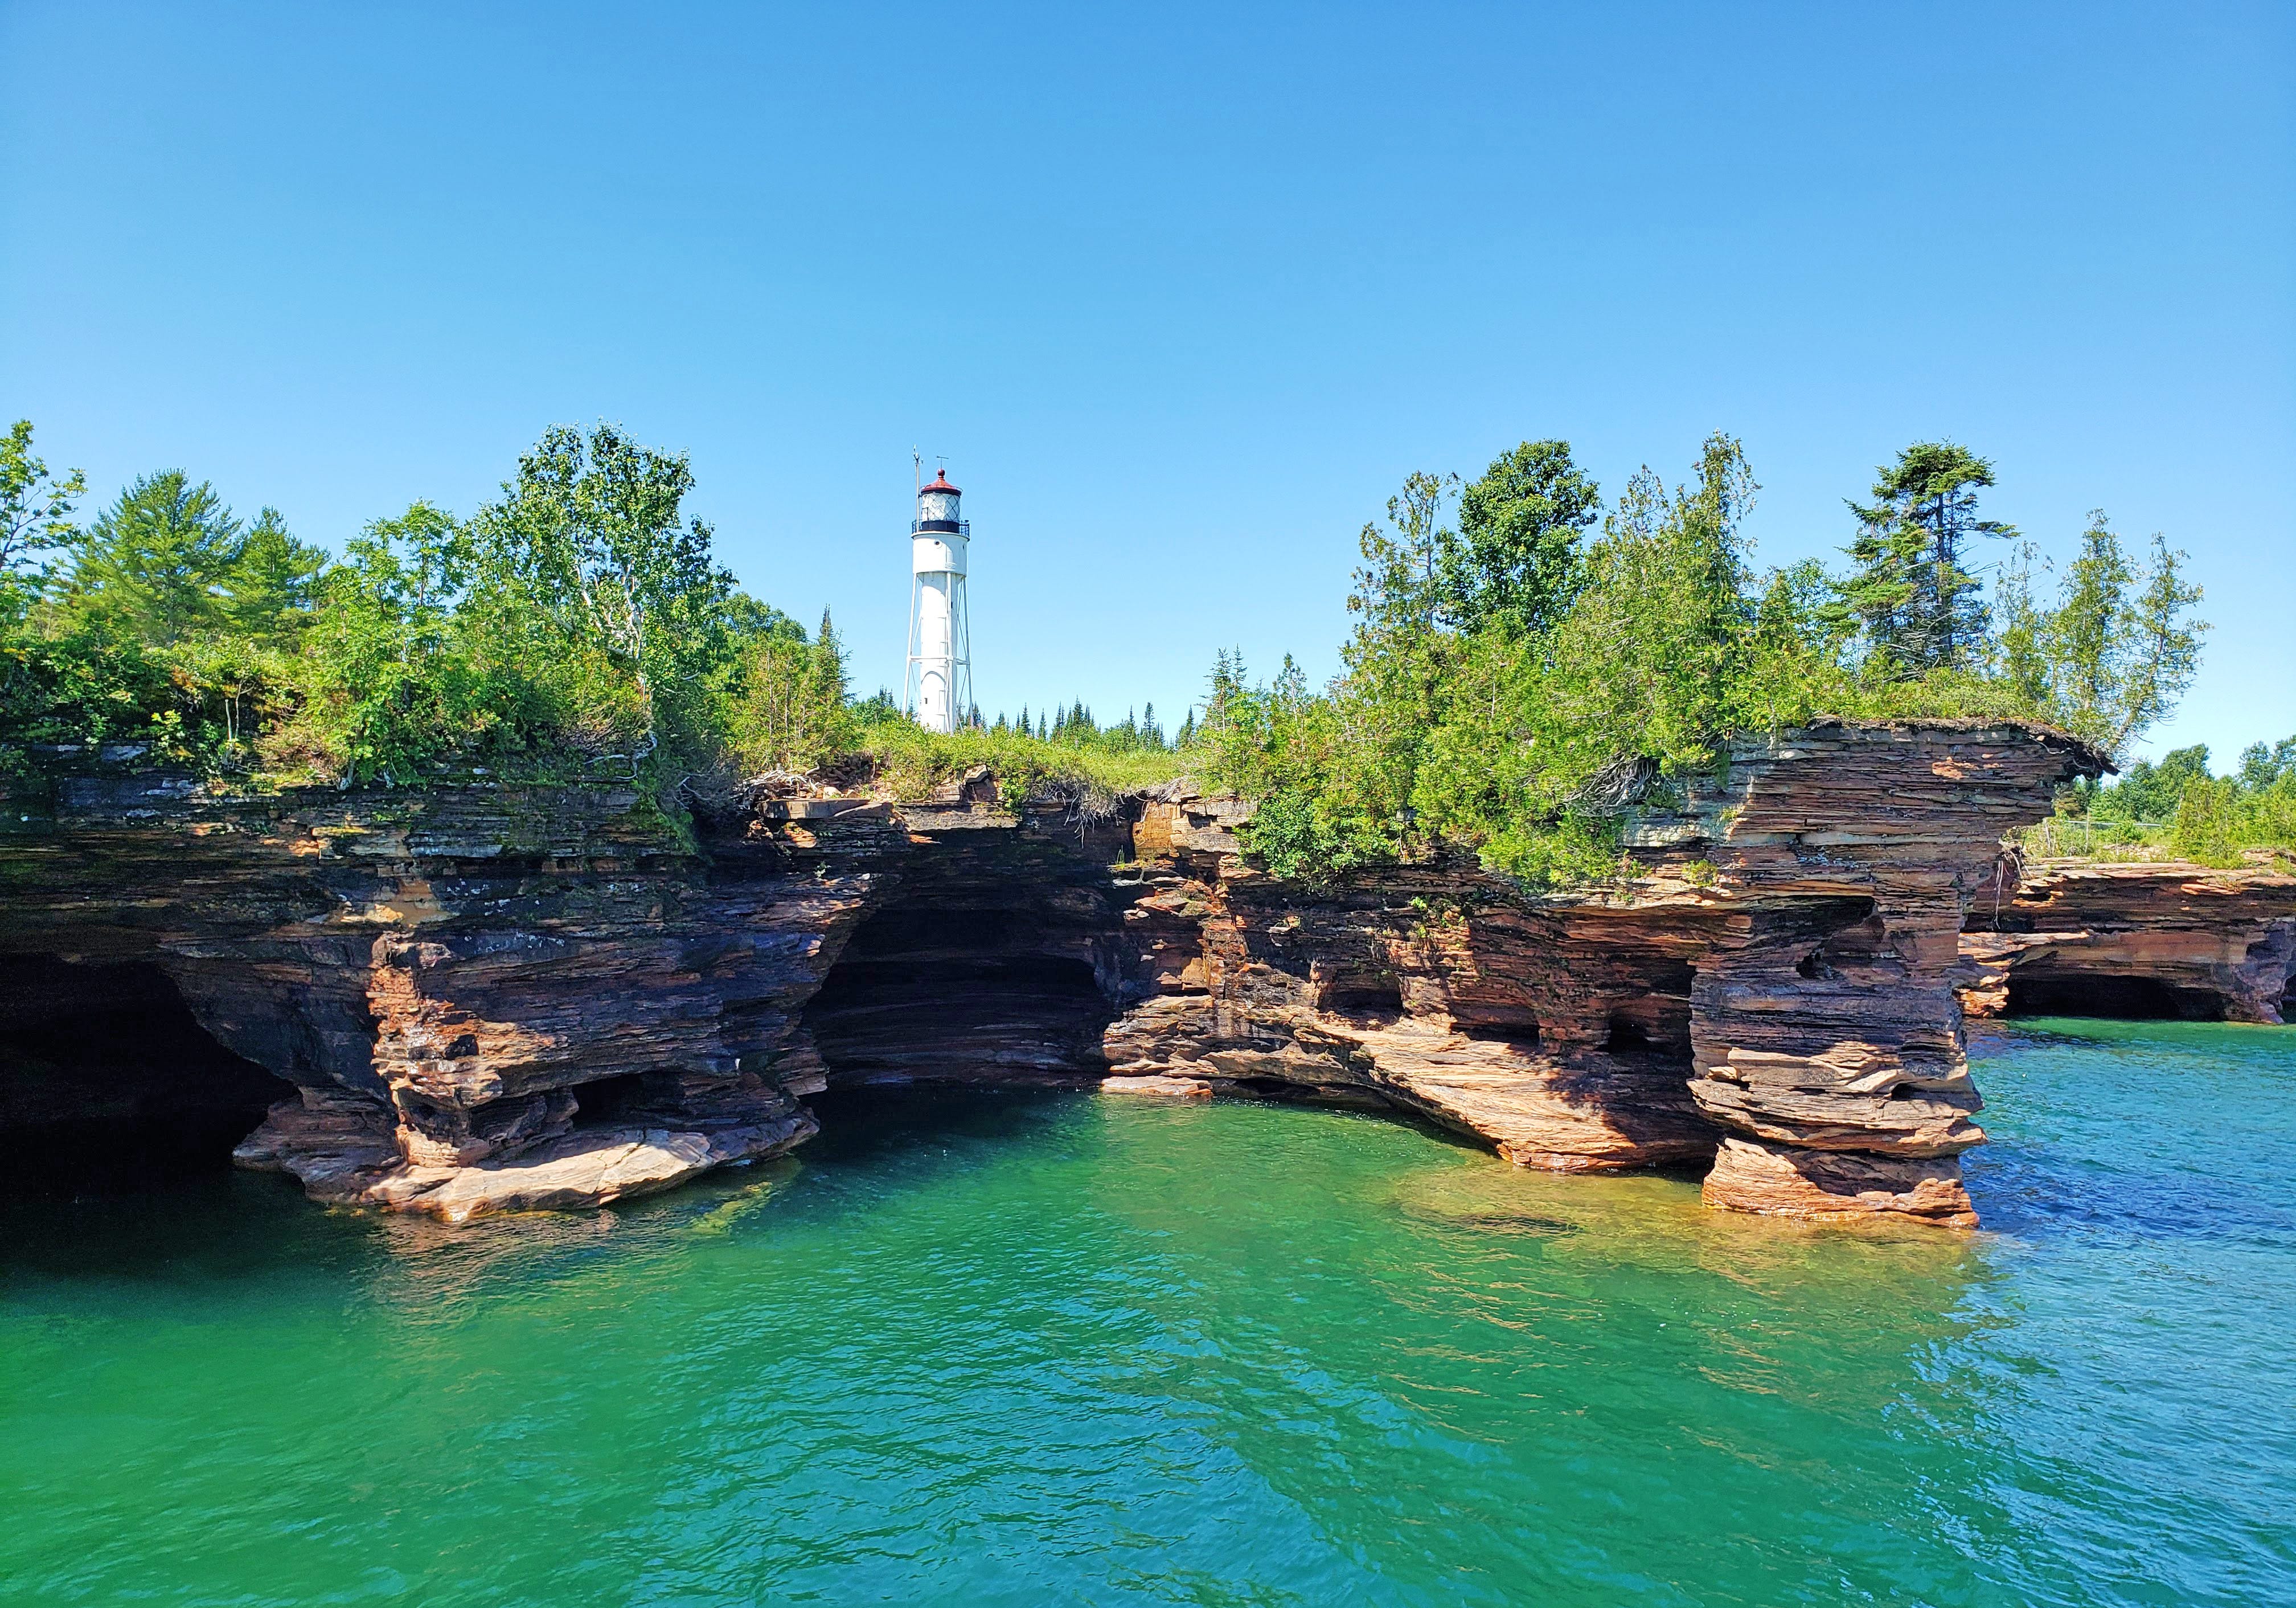 Wisconsin's Apostle Islands could become America's newest national park